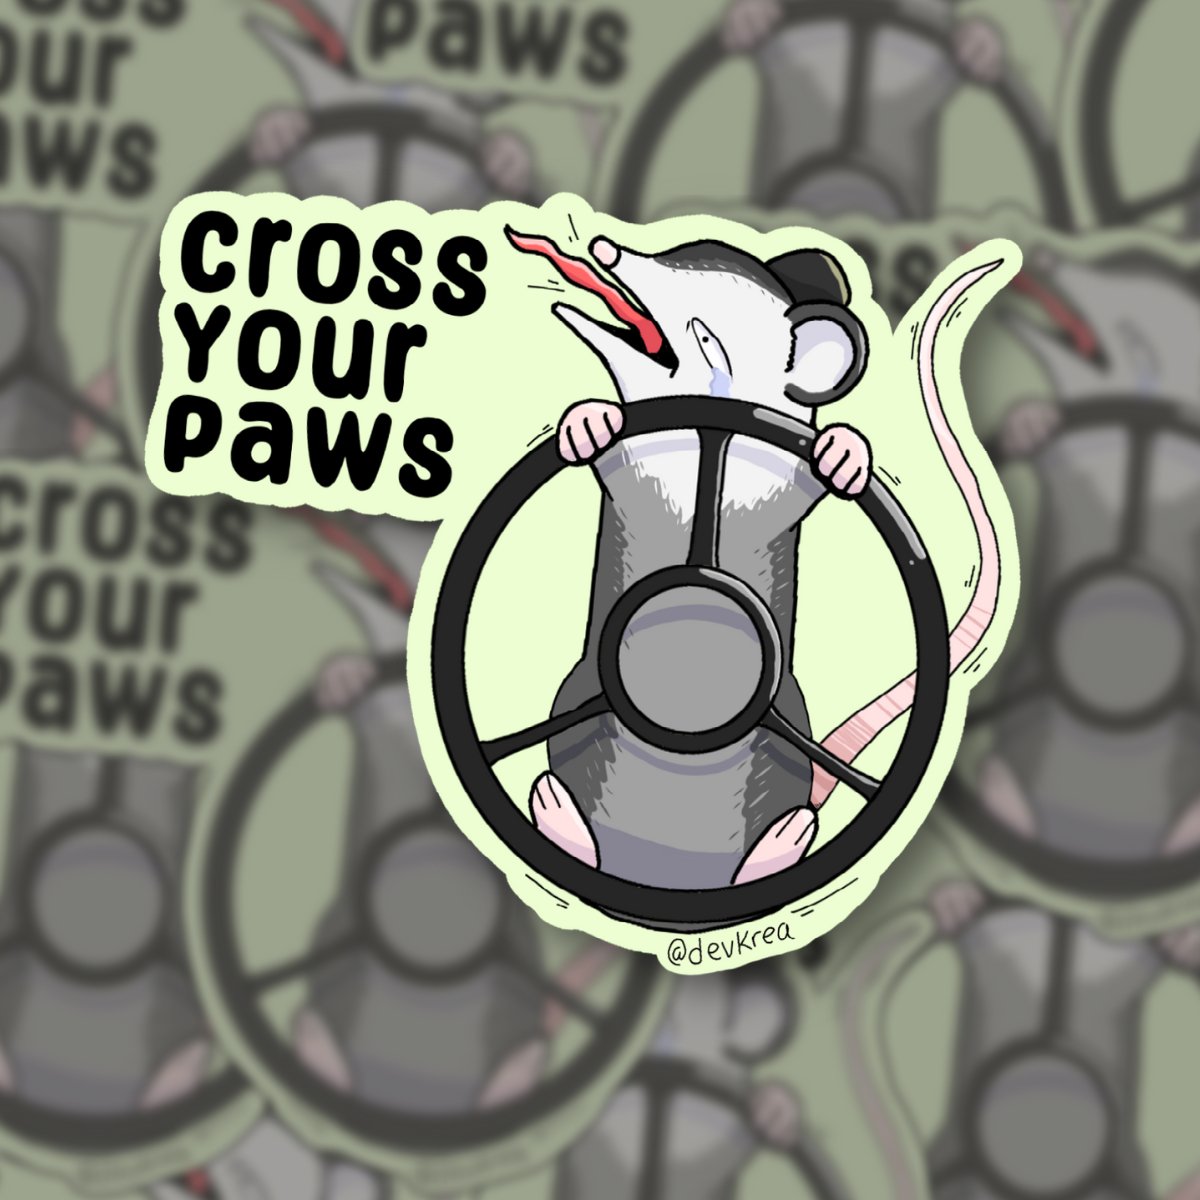 Cross Your Paws Sticker | 3" | Deviant Kreations - Deviantkreations